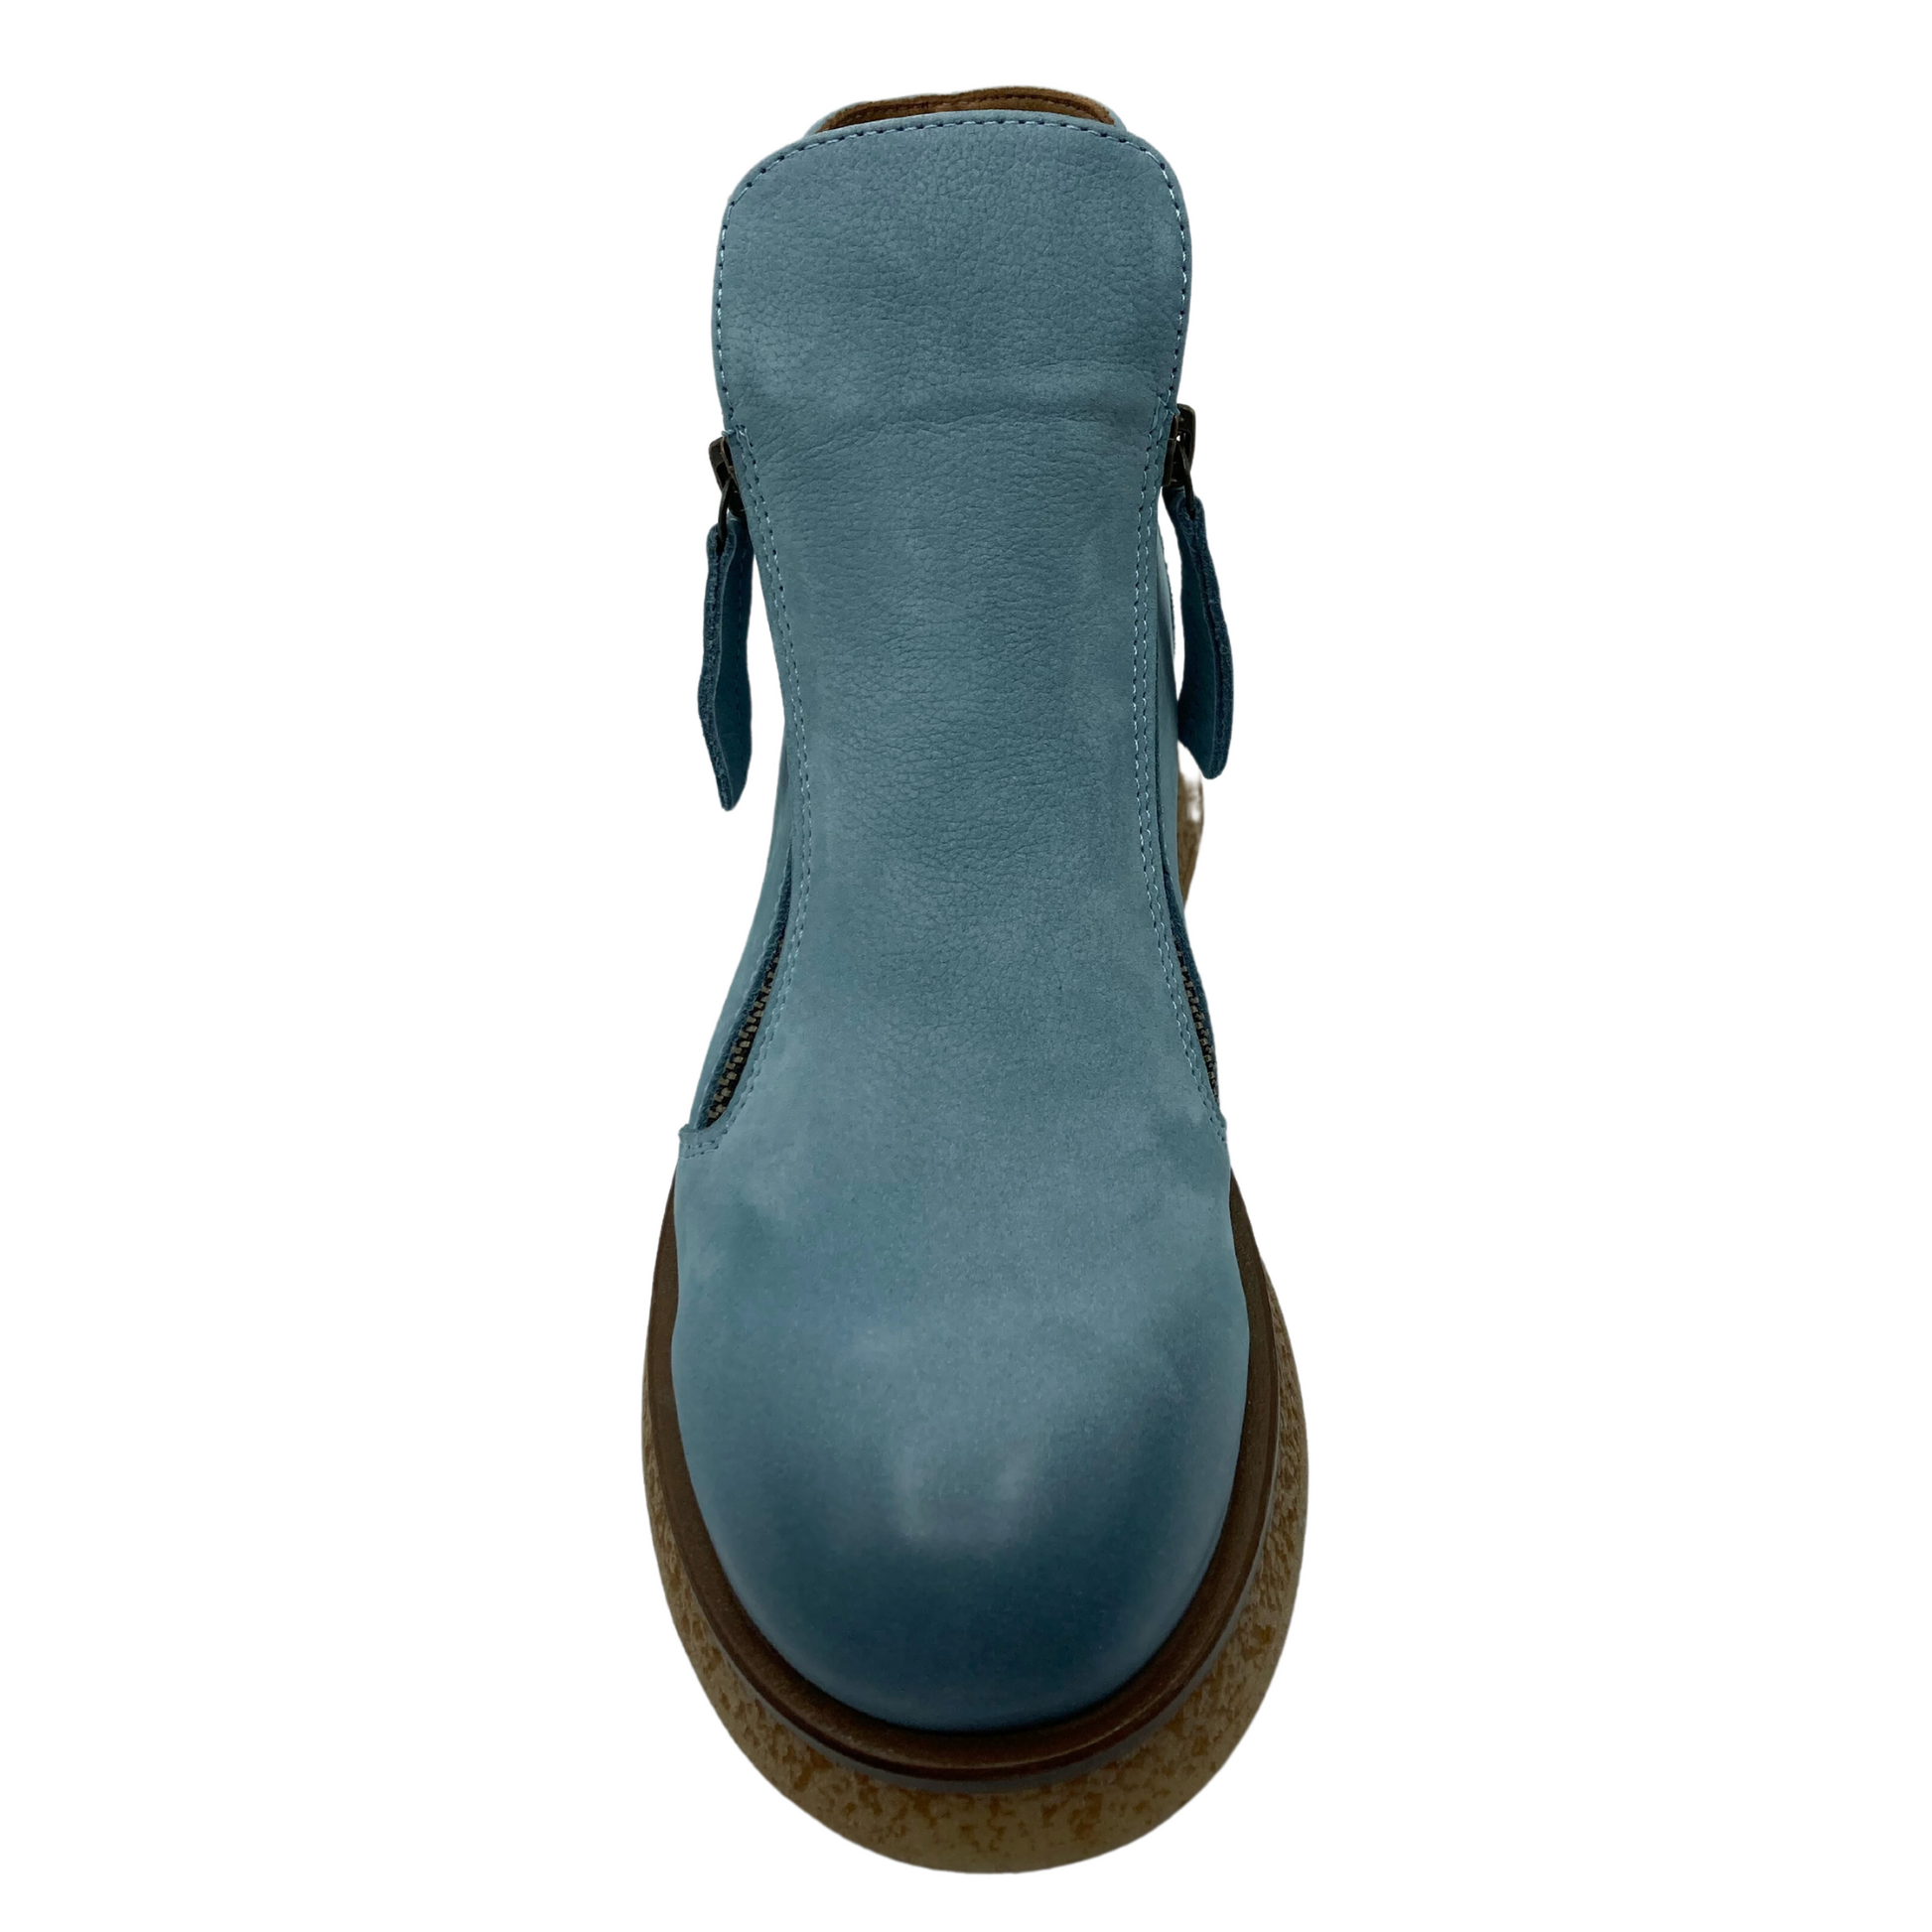 Top view of sky blue ankle boot with rounded toe and platform outsole